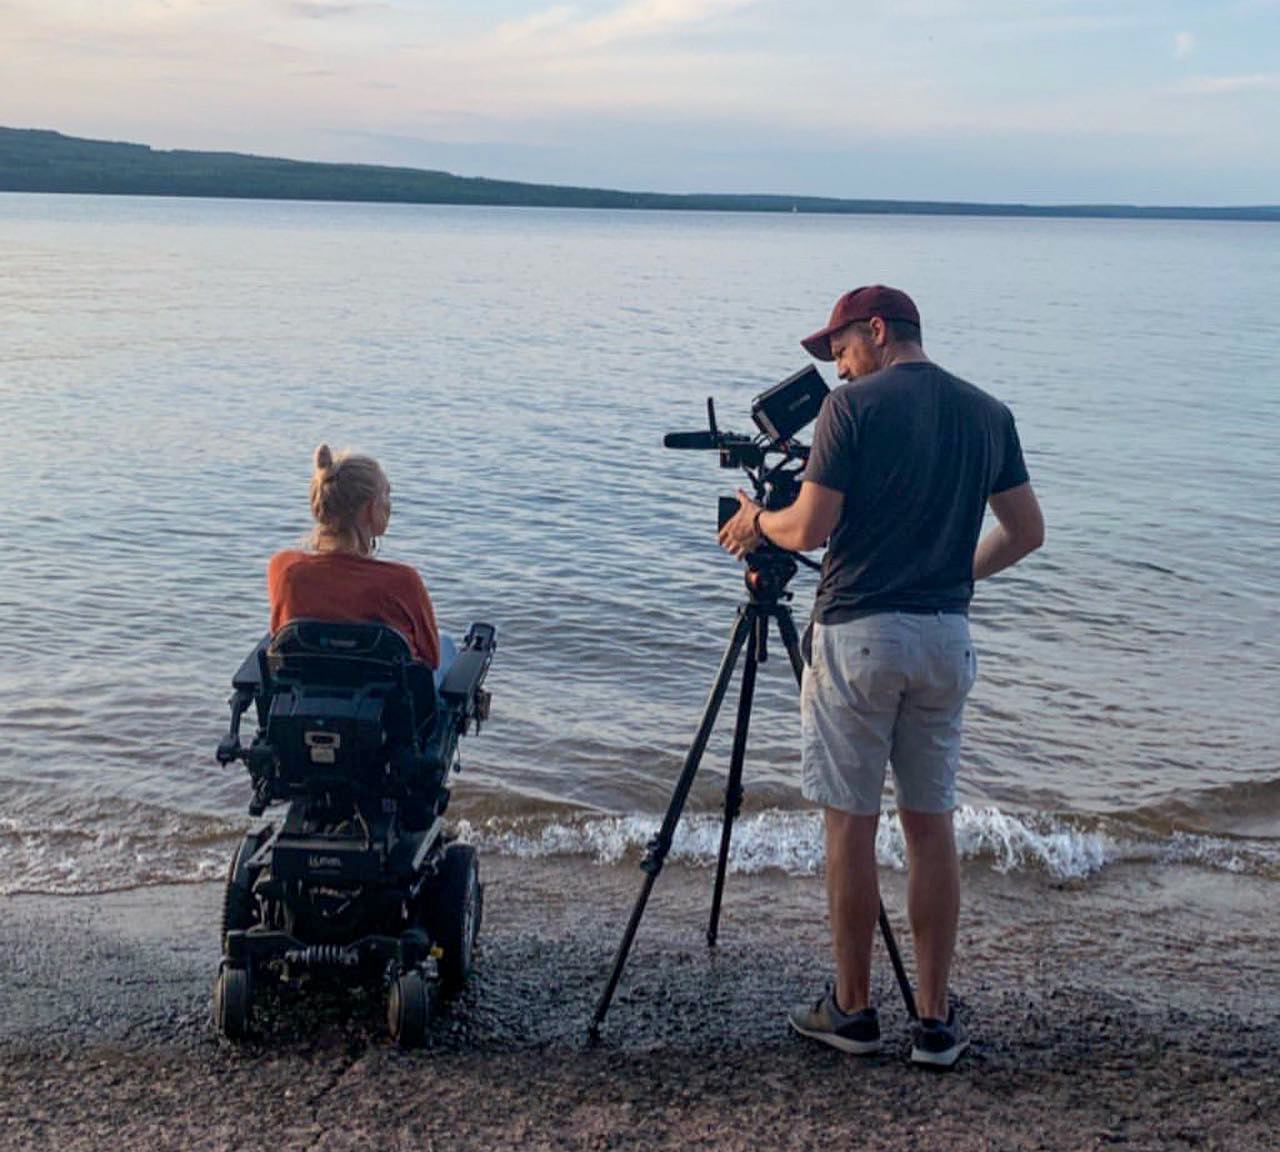 Peterson films at Lake Superior, where she had her diving accident.